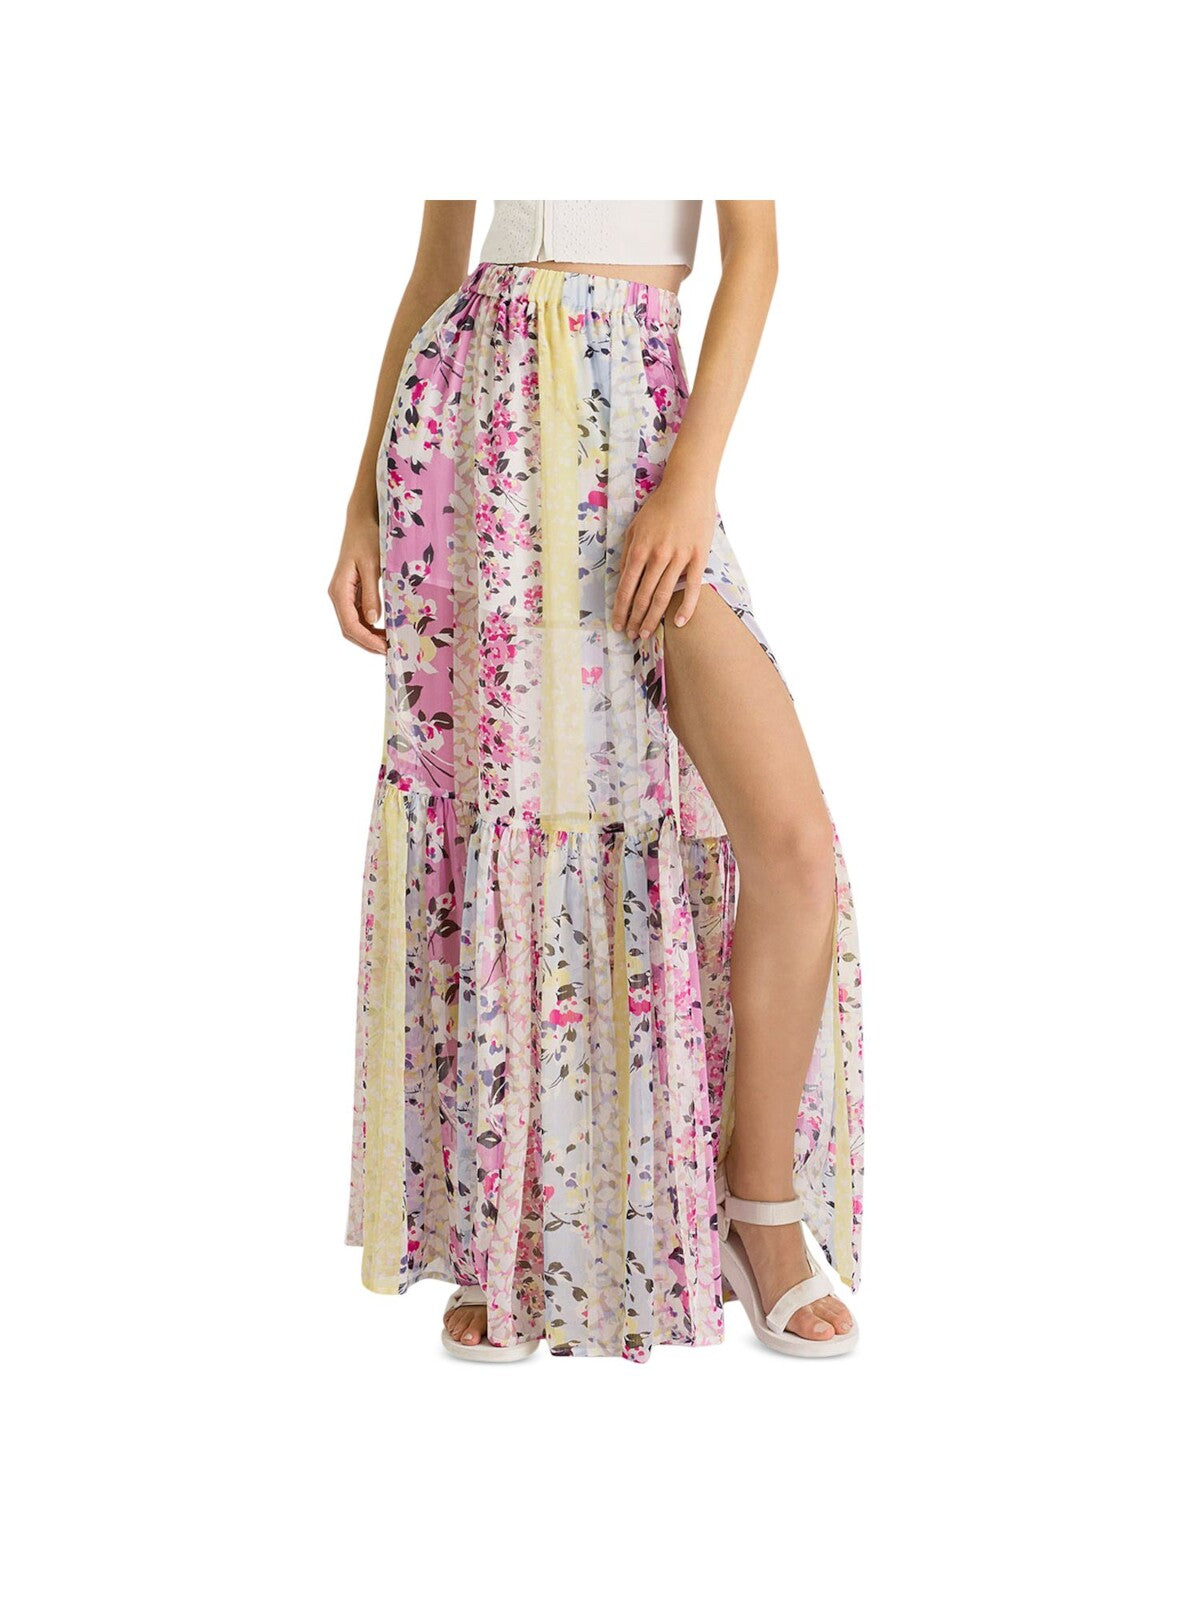 FRENCH CONNECTION Womens White Ruffled Sheer High-slit Crinkled Floral Maxi Skirt M